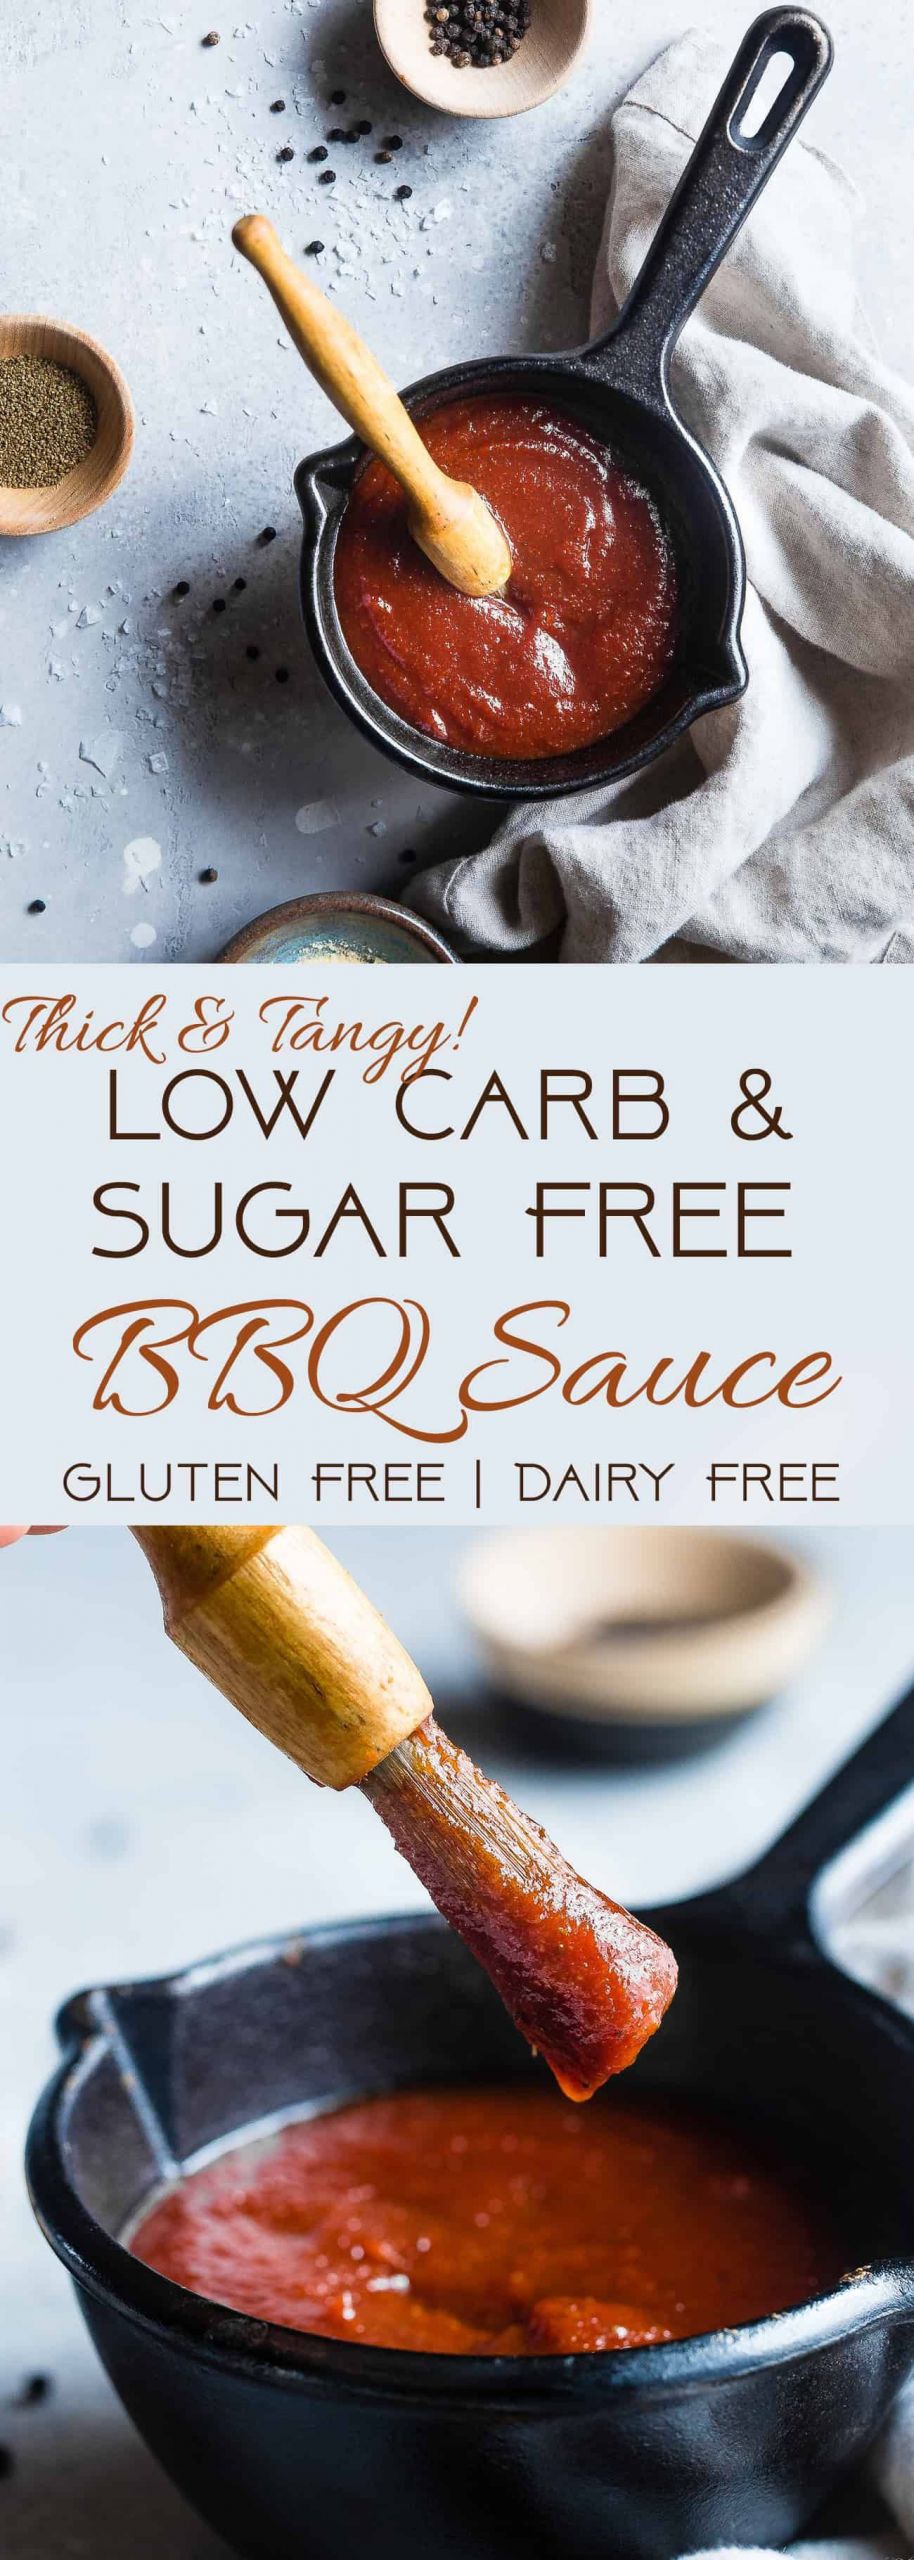 Low Calorie Bbq Sauce Recipe
 Sugar Free Low Carb BBQ Sauce A simple healthy homemade